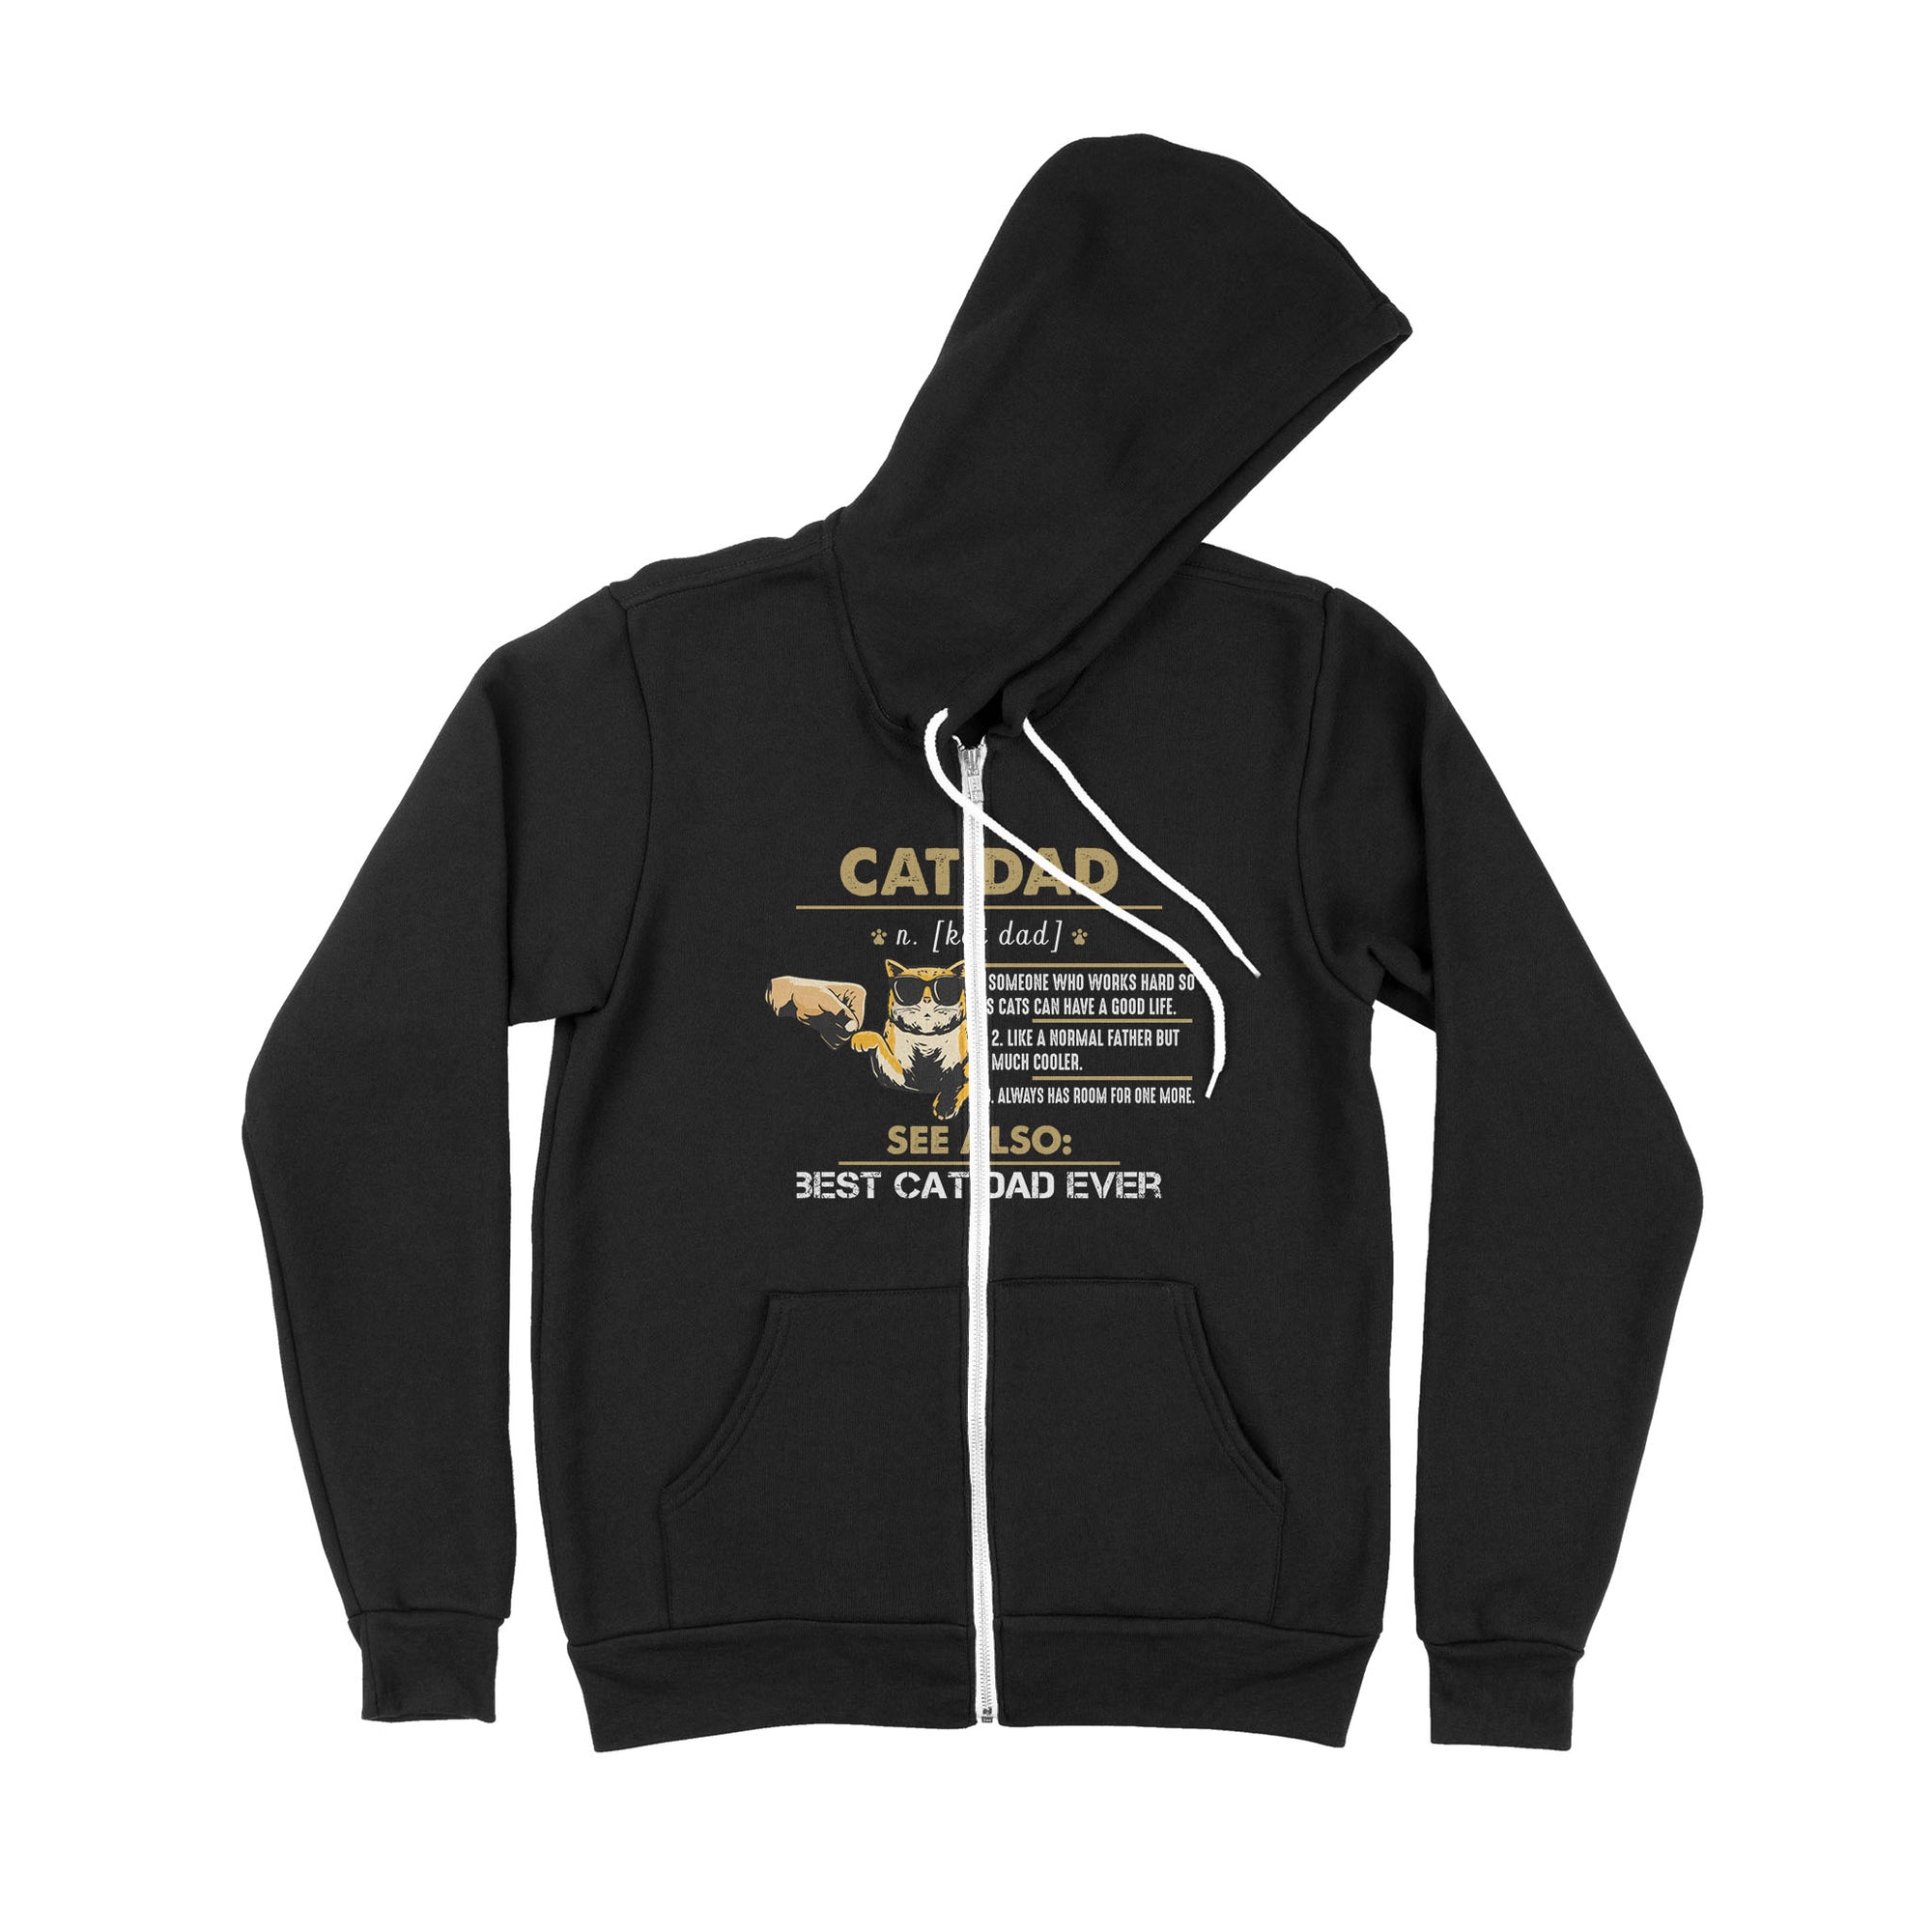 Cat Lover Cat Dad Someone Who Works Hard So His Cats Can Have A Good Life Like A Normal Father But Much Cooler - Premium Zip Hoodie